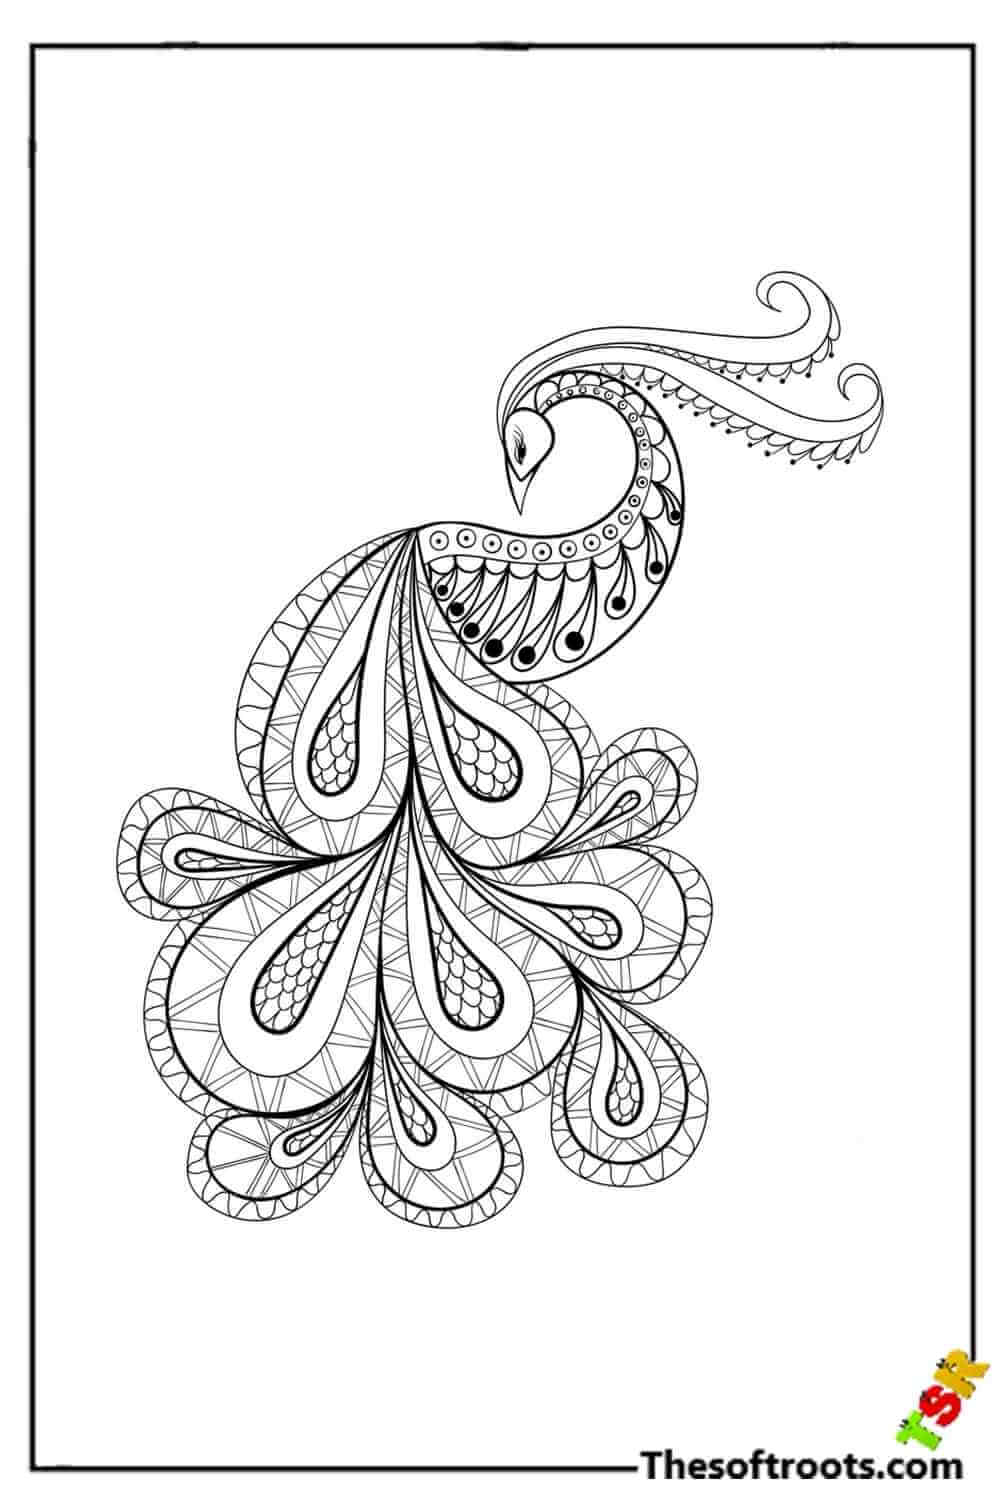 Adult Peacock coloring pages